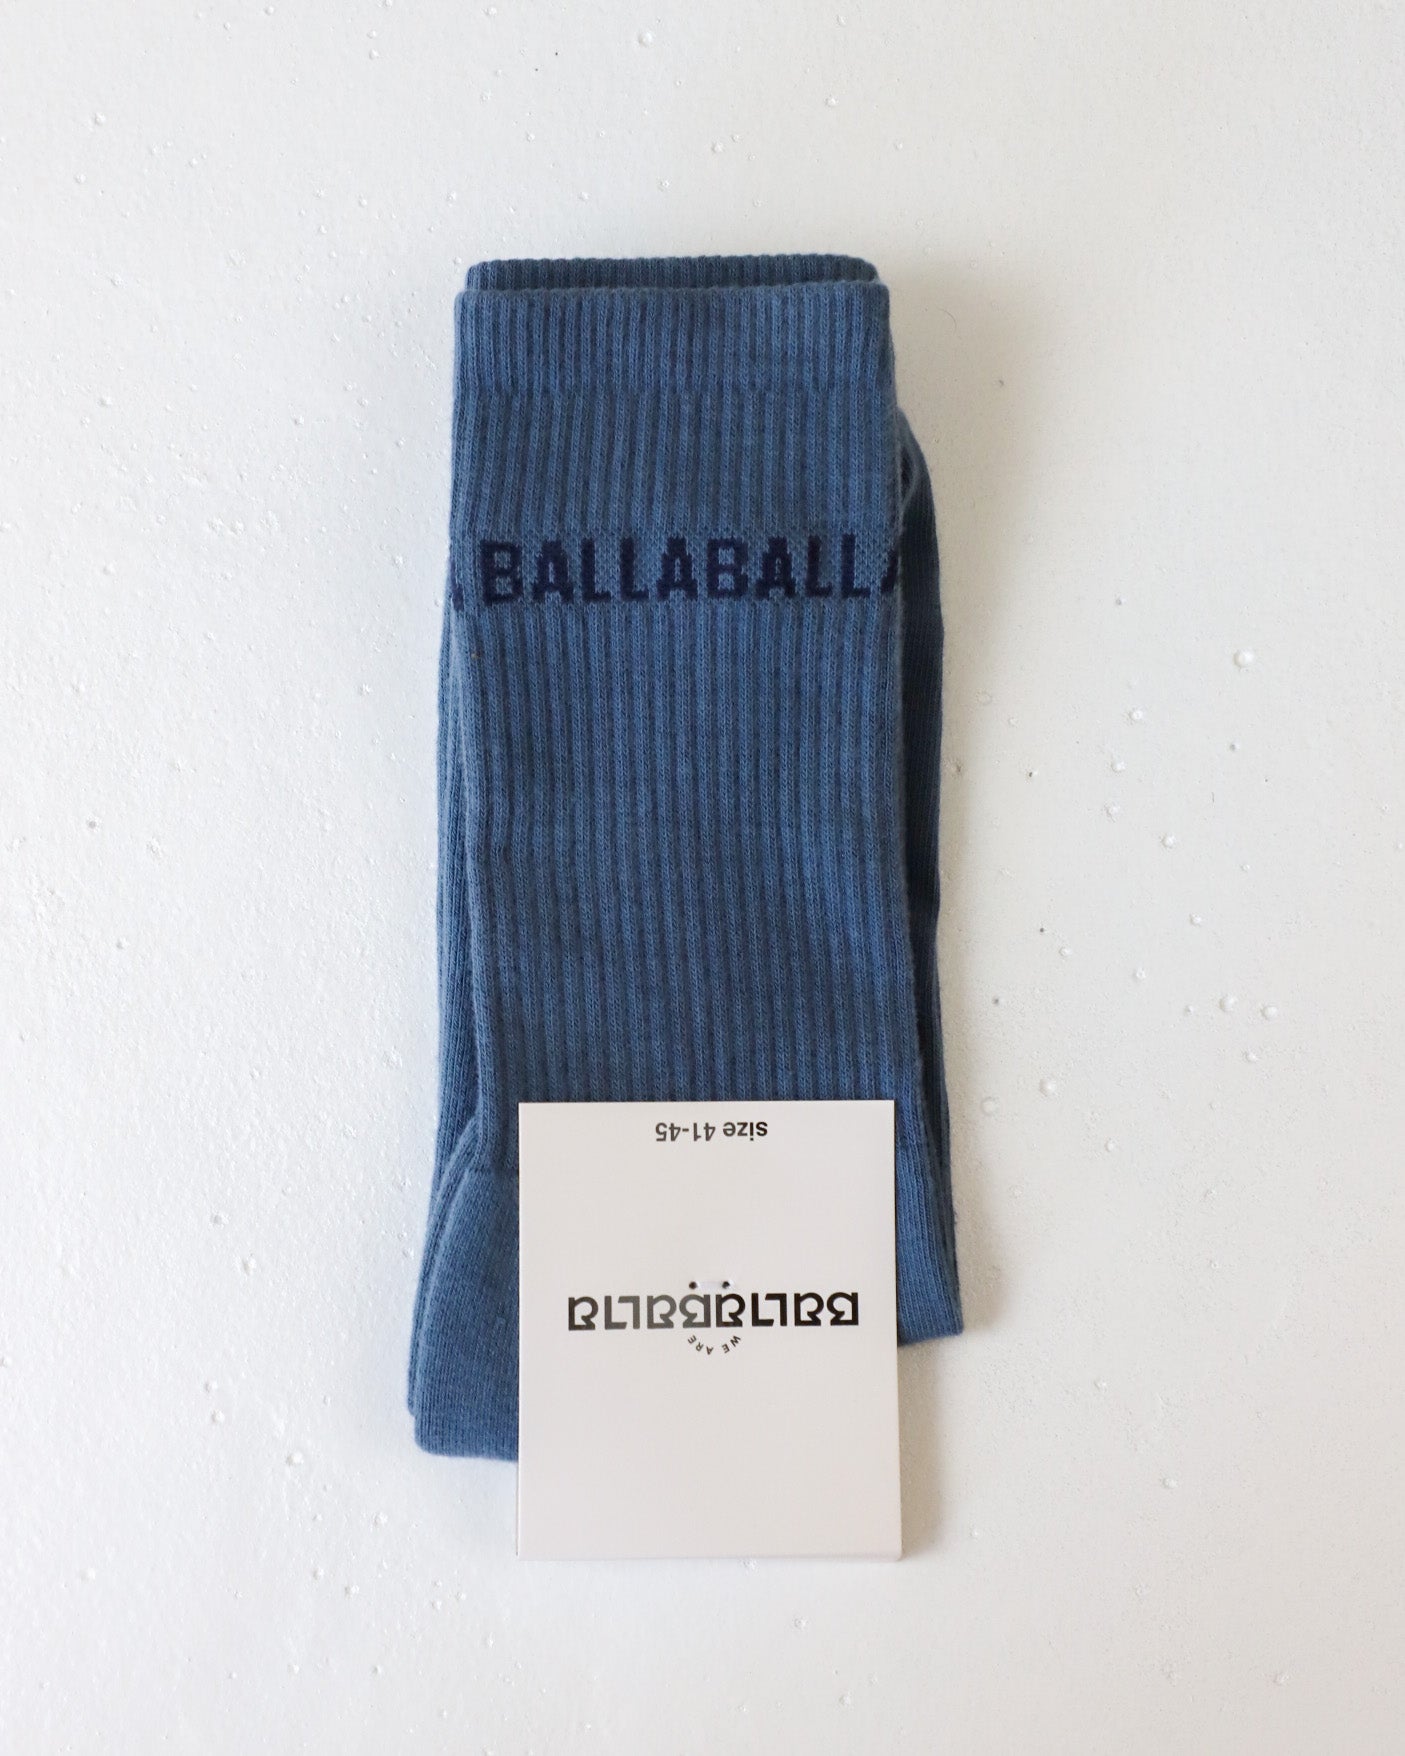 ALL-TIMES BALLA BALLA SOCKS WASHED-OUT NAVY